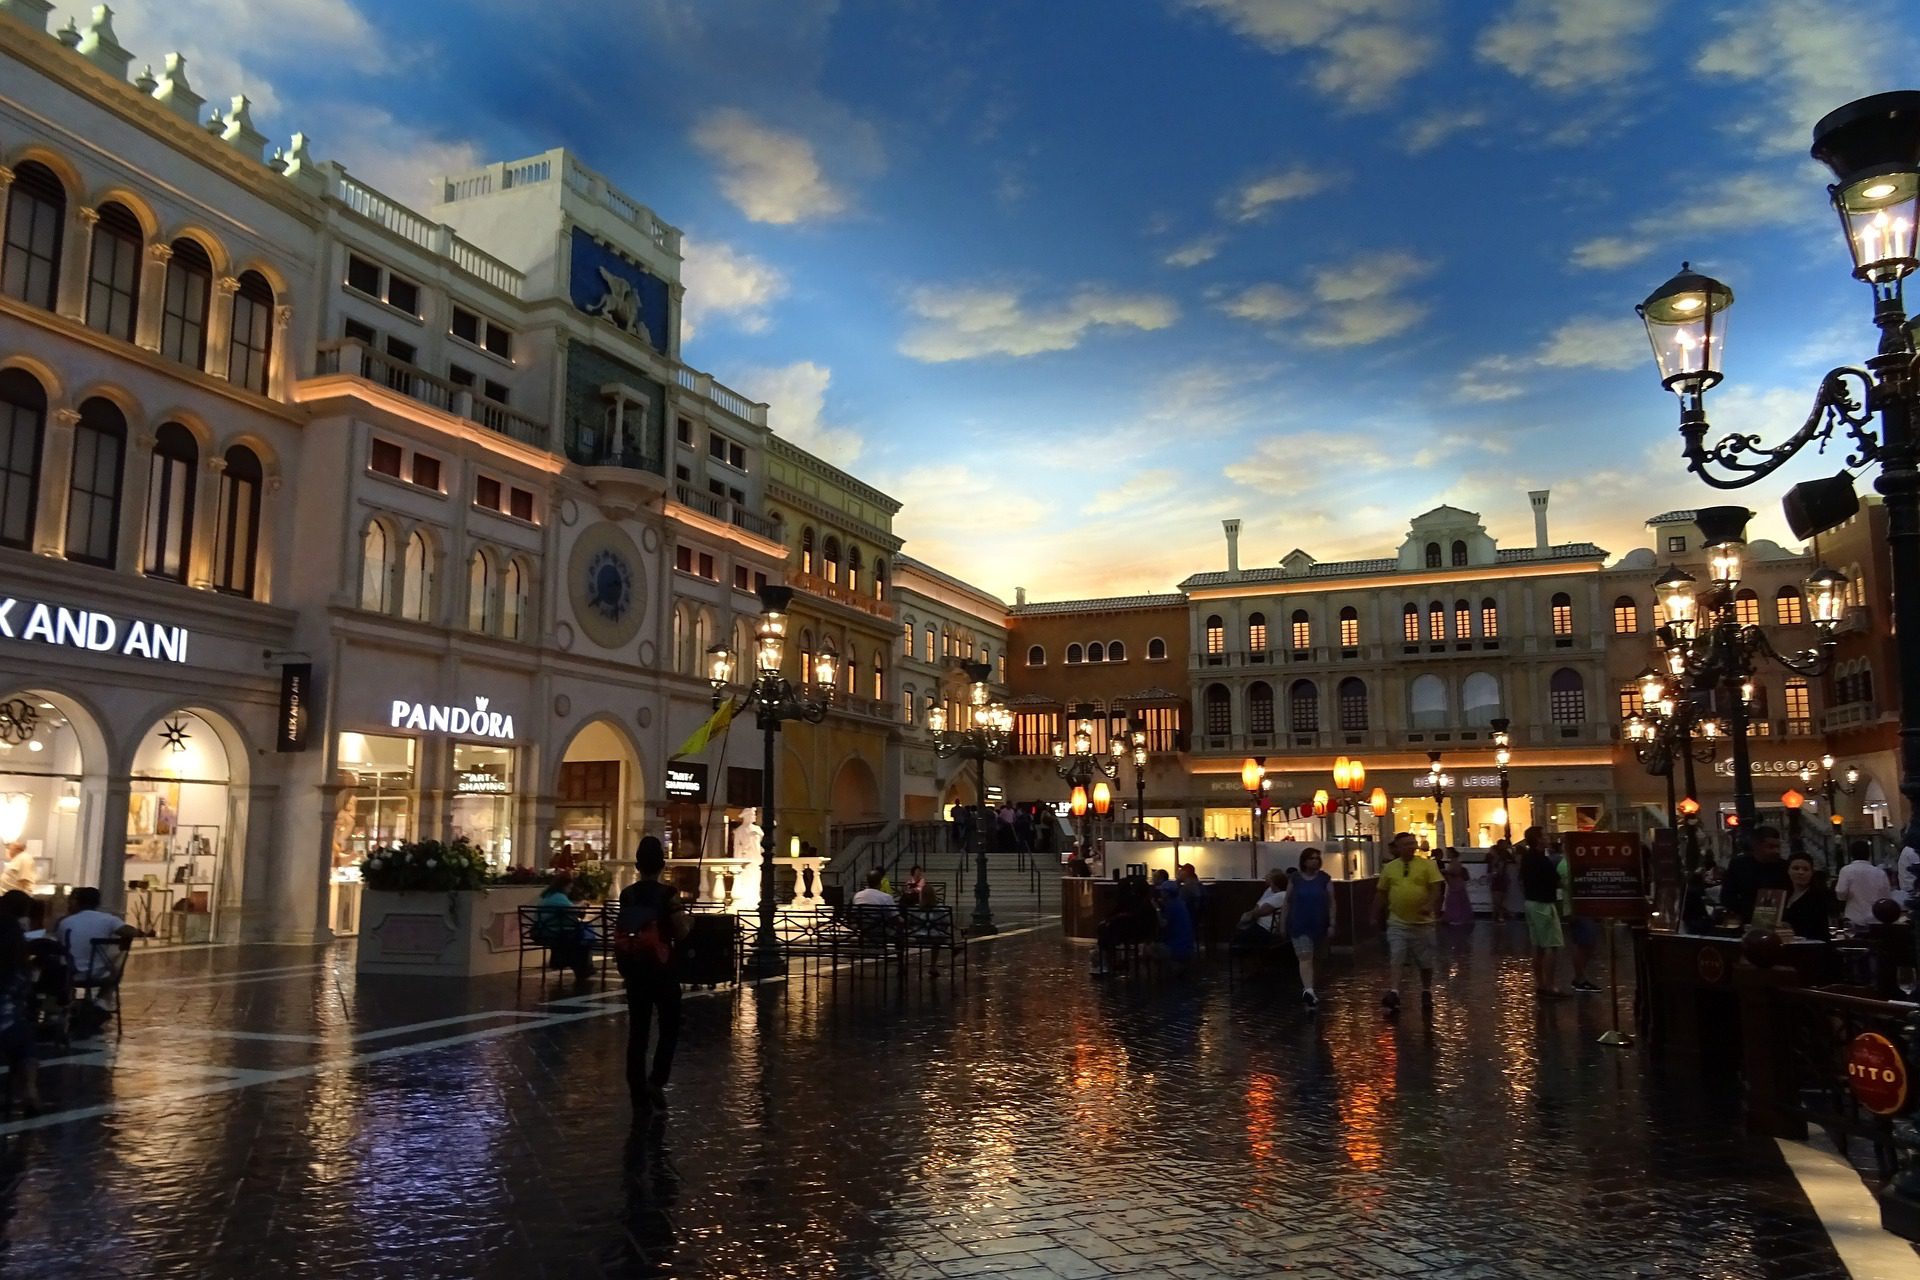 Grand Canal Shoppes and St. Mark's Square at The Venetian, Las Vegas